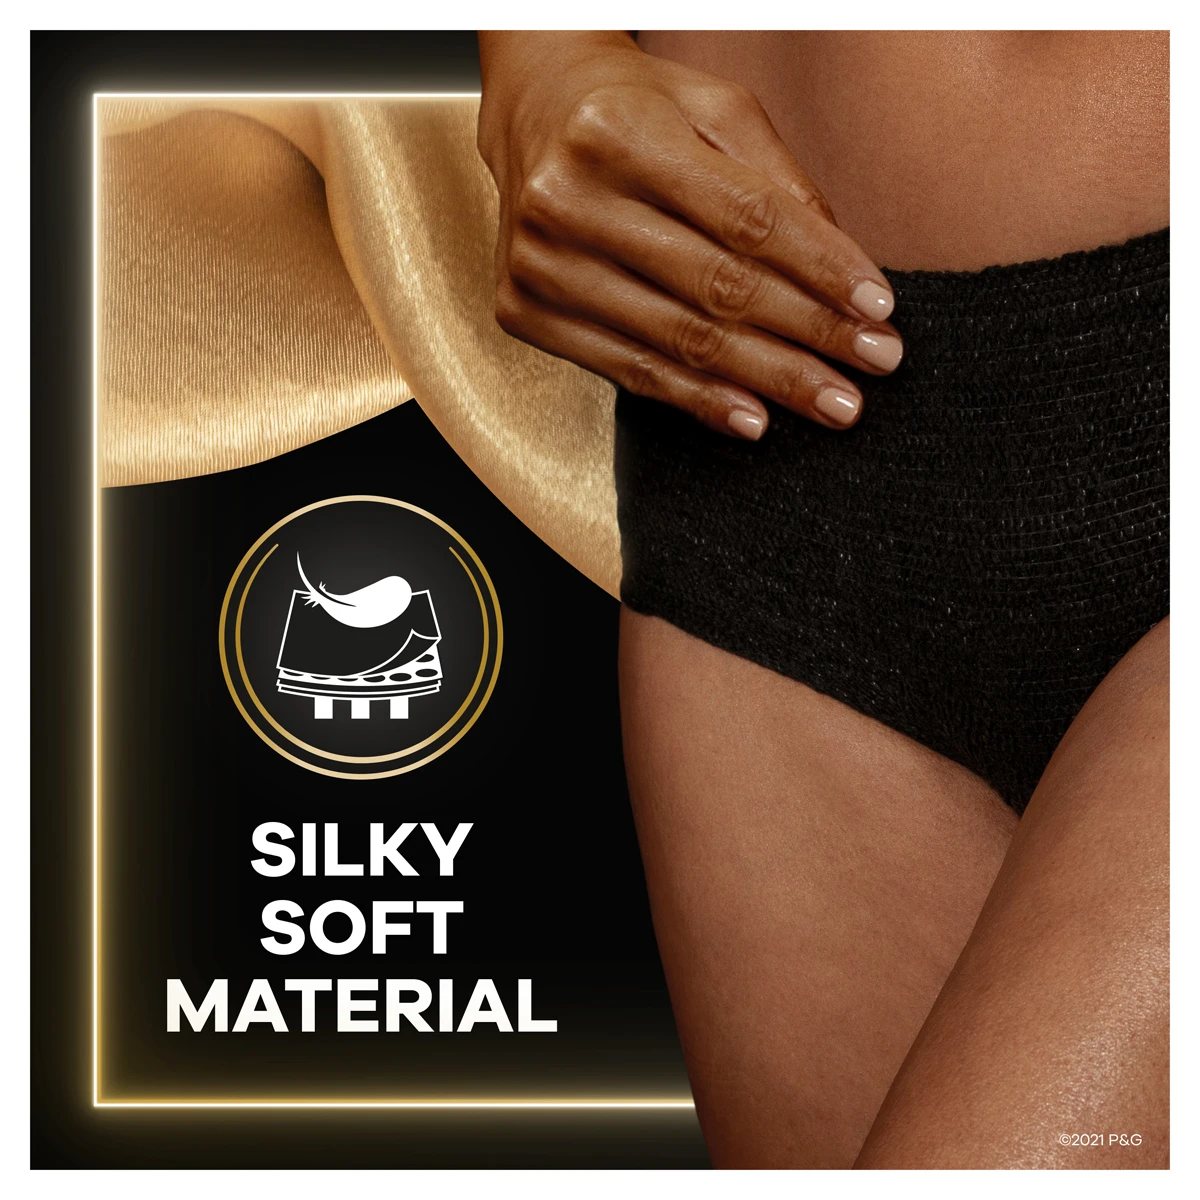 Always-Pants-ZZZ-Silky-Soft-Material